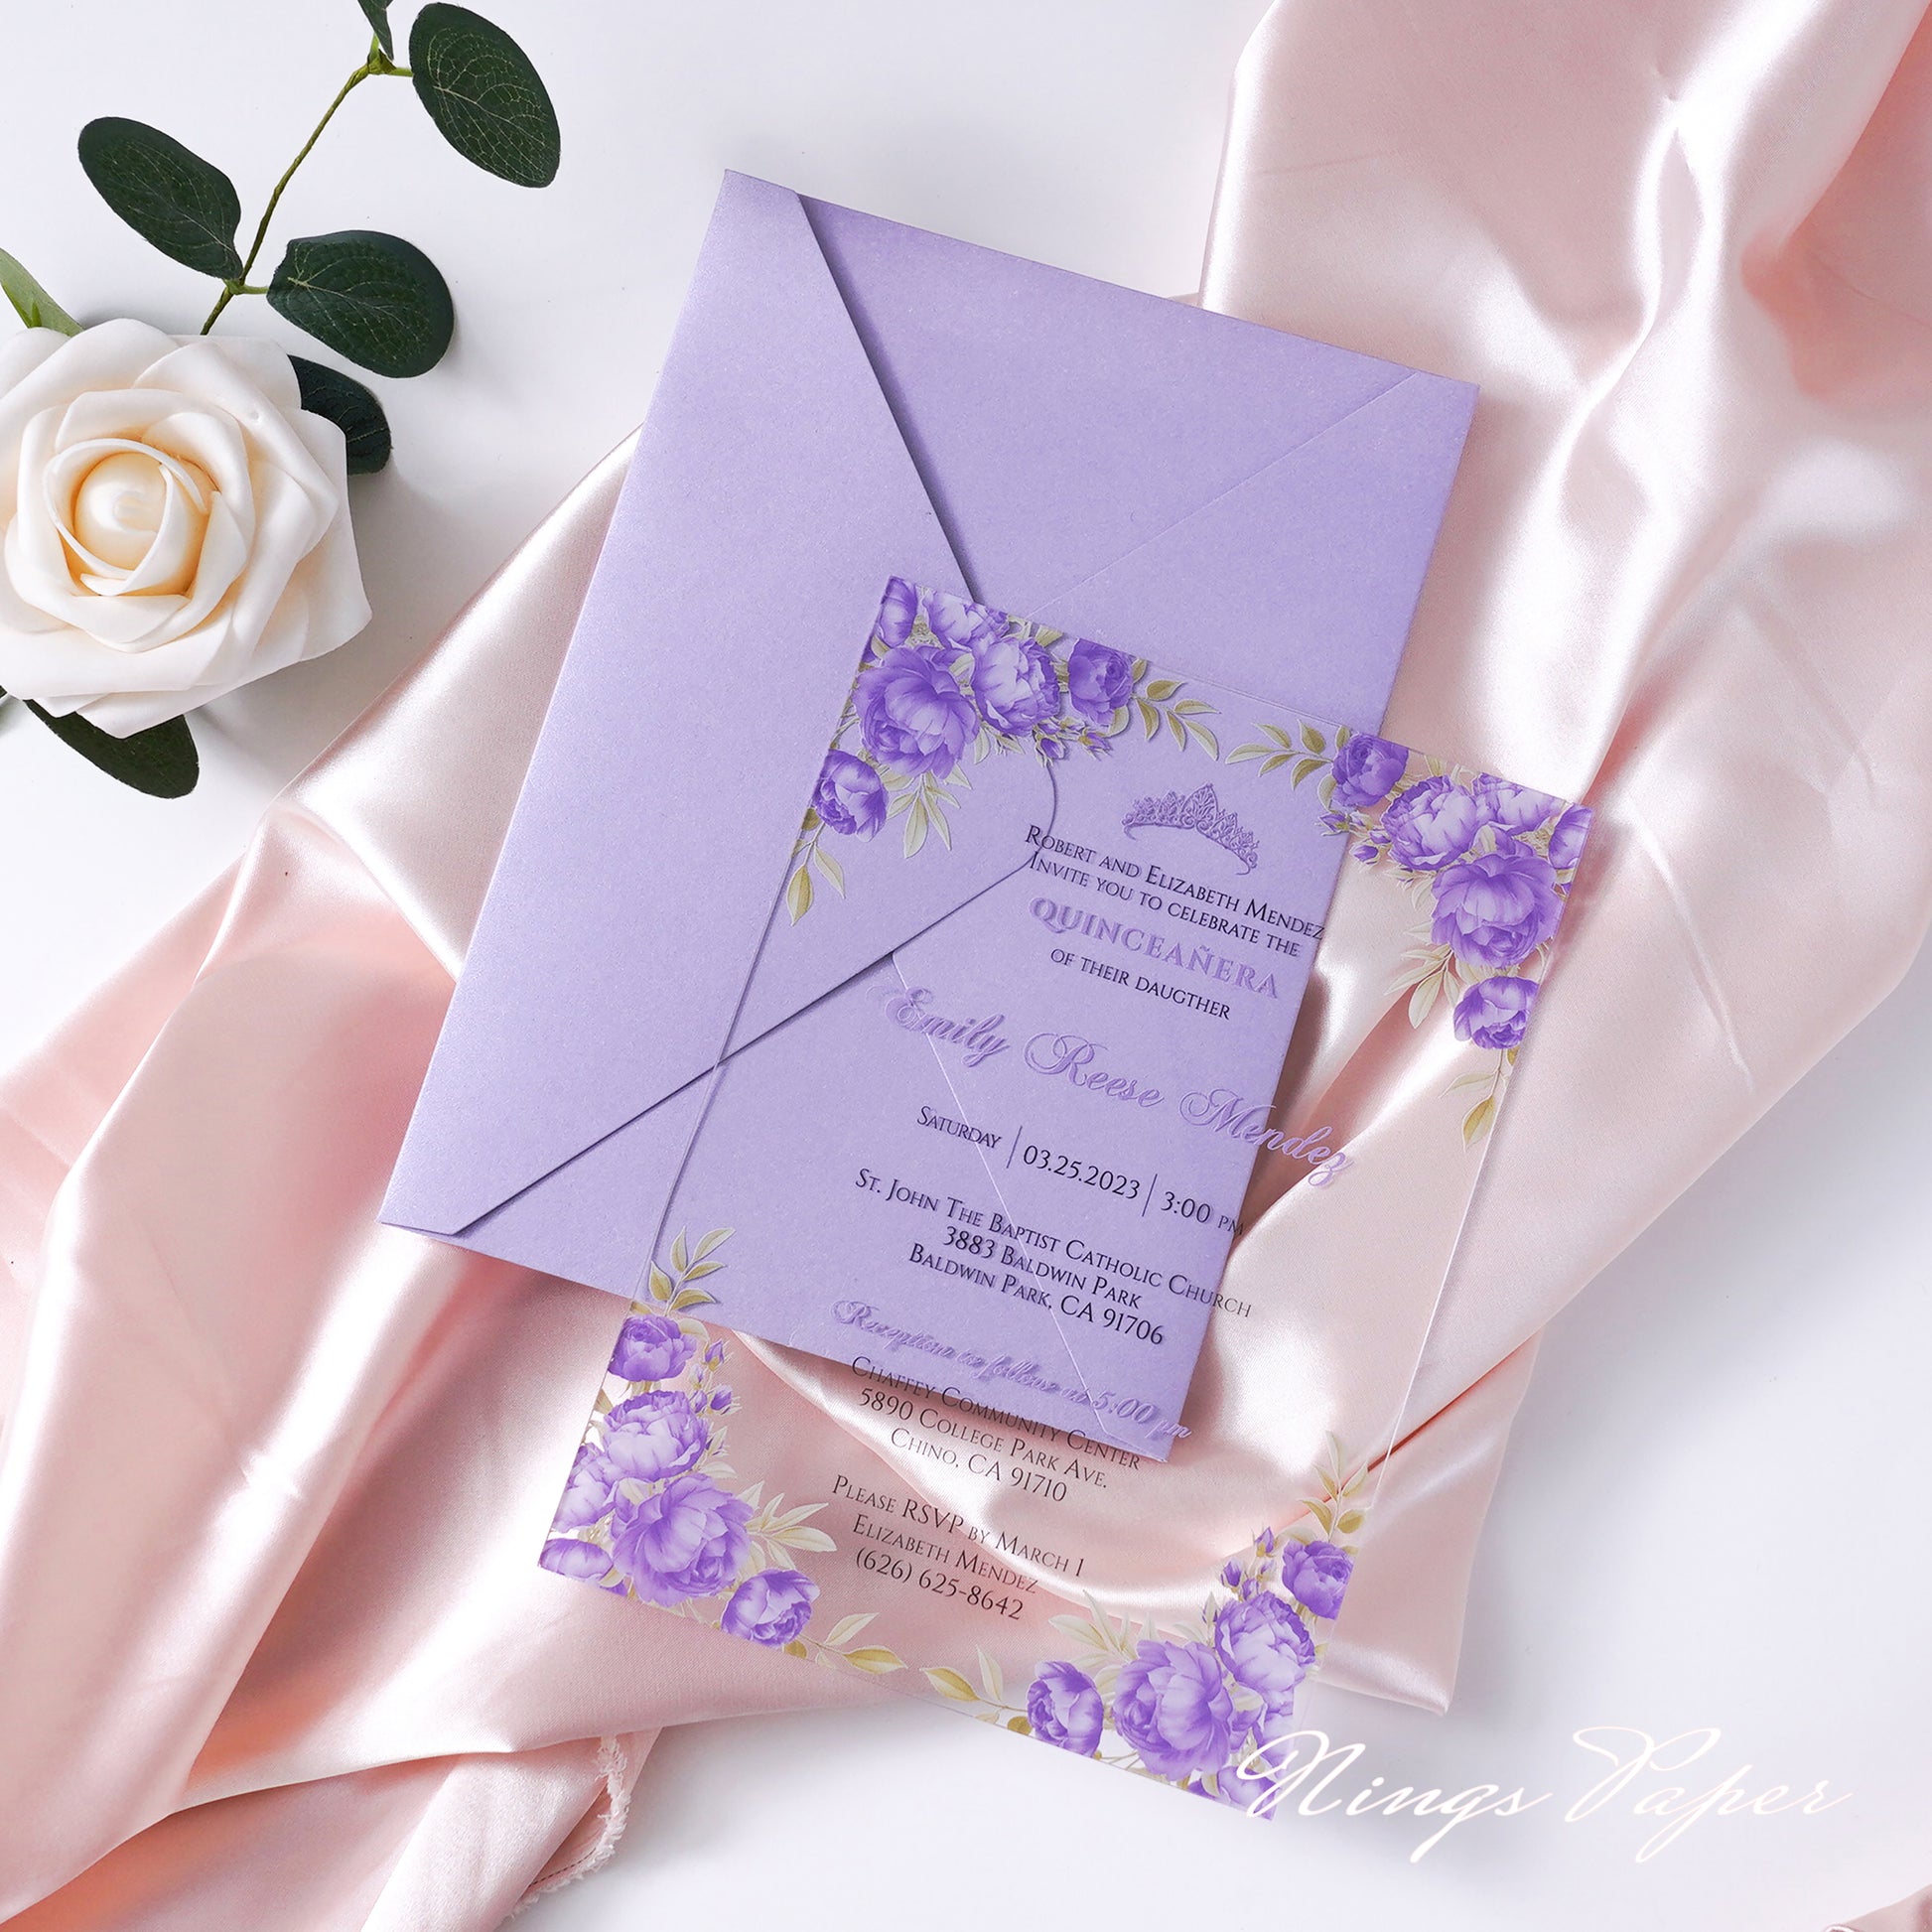 1mm/0.04 Lilac Clear Acrylic Quinceanera Invitation Cards with Envelopes